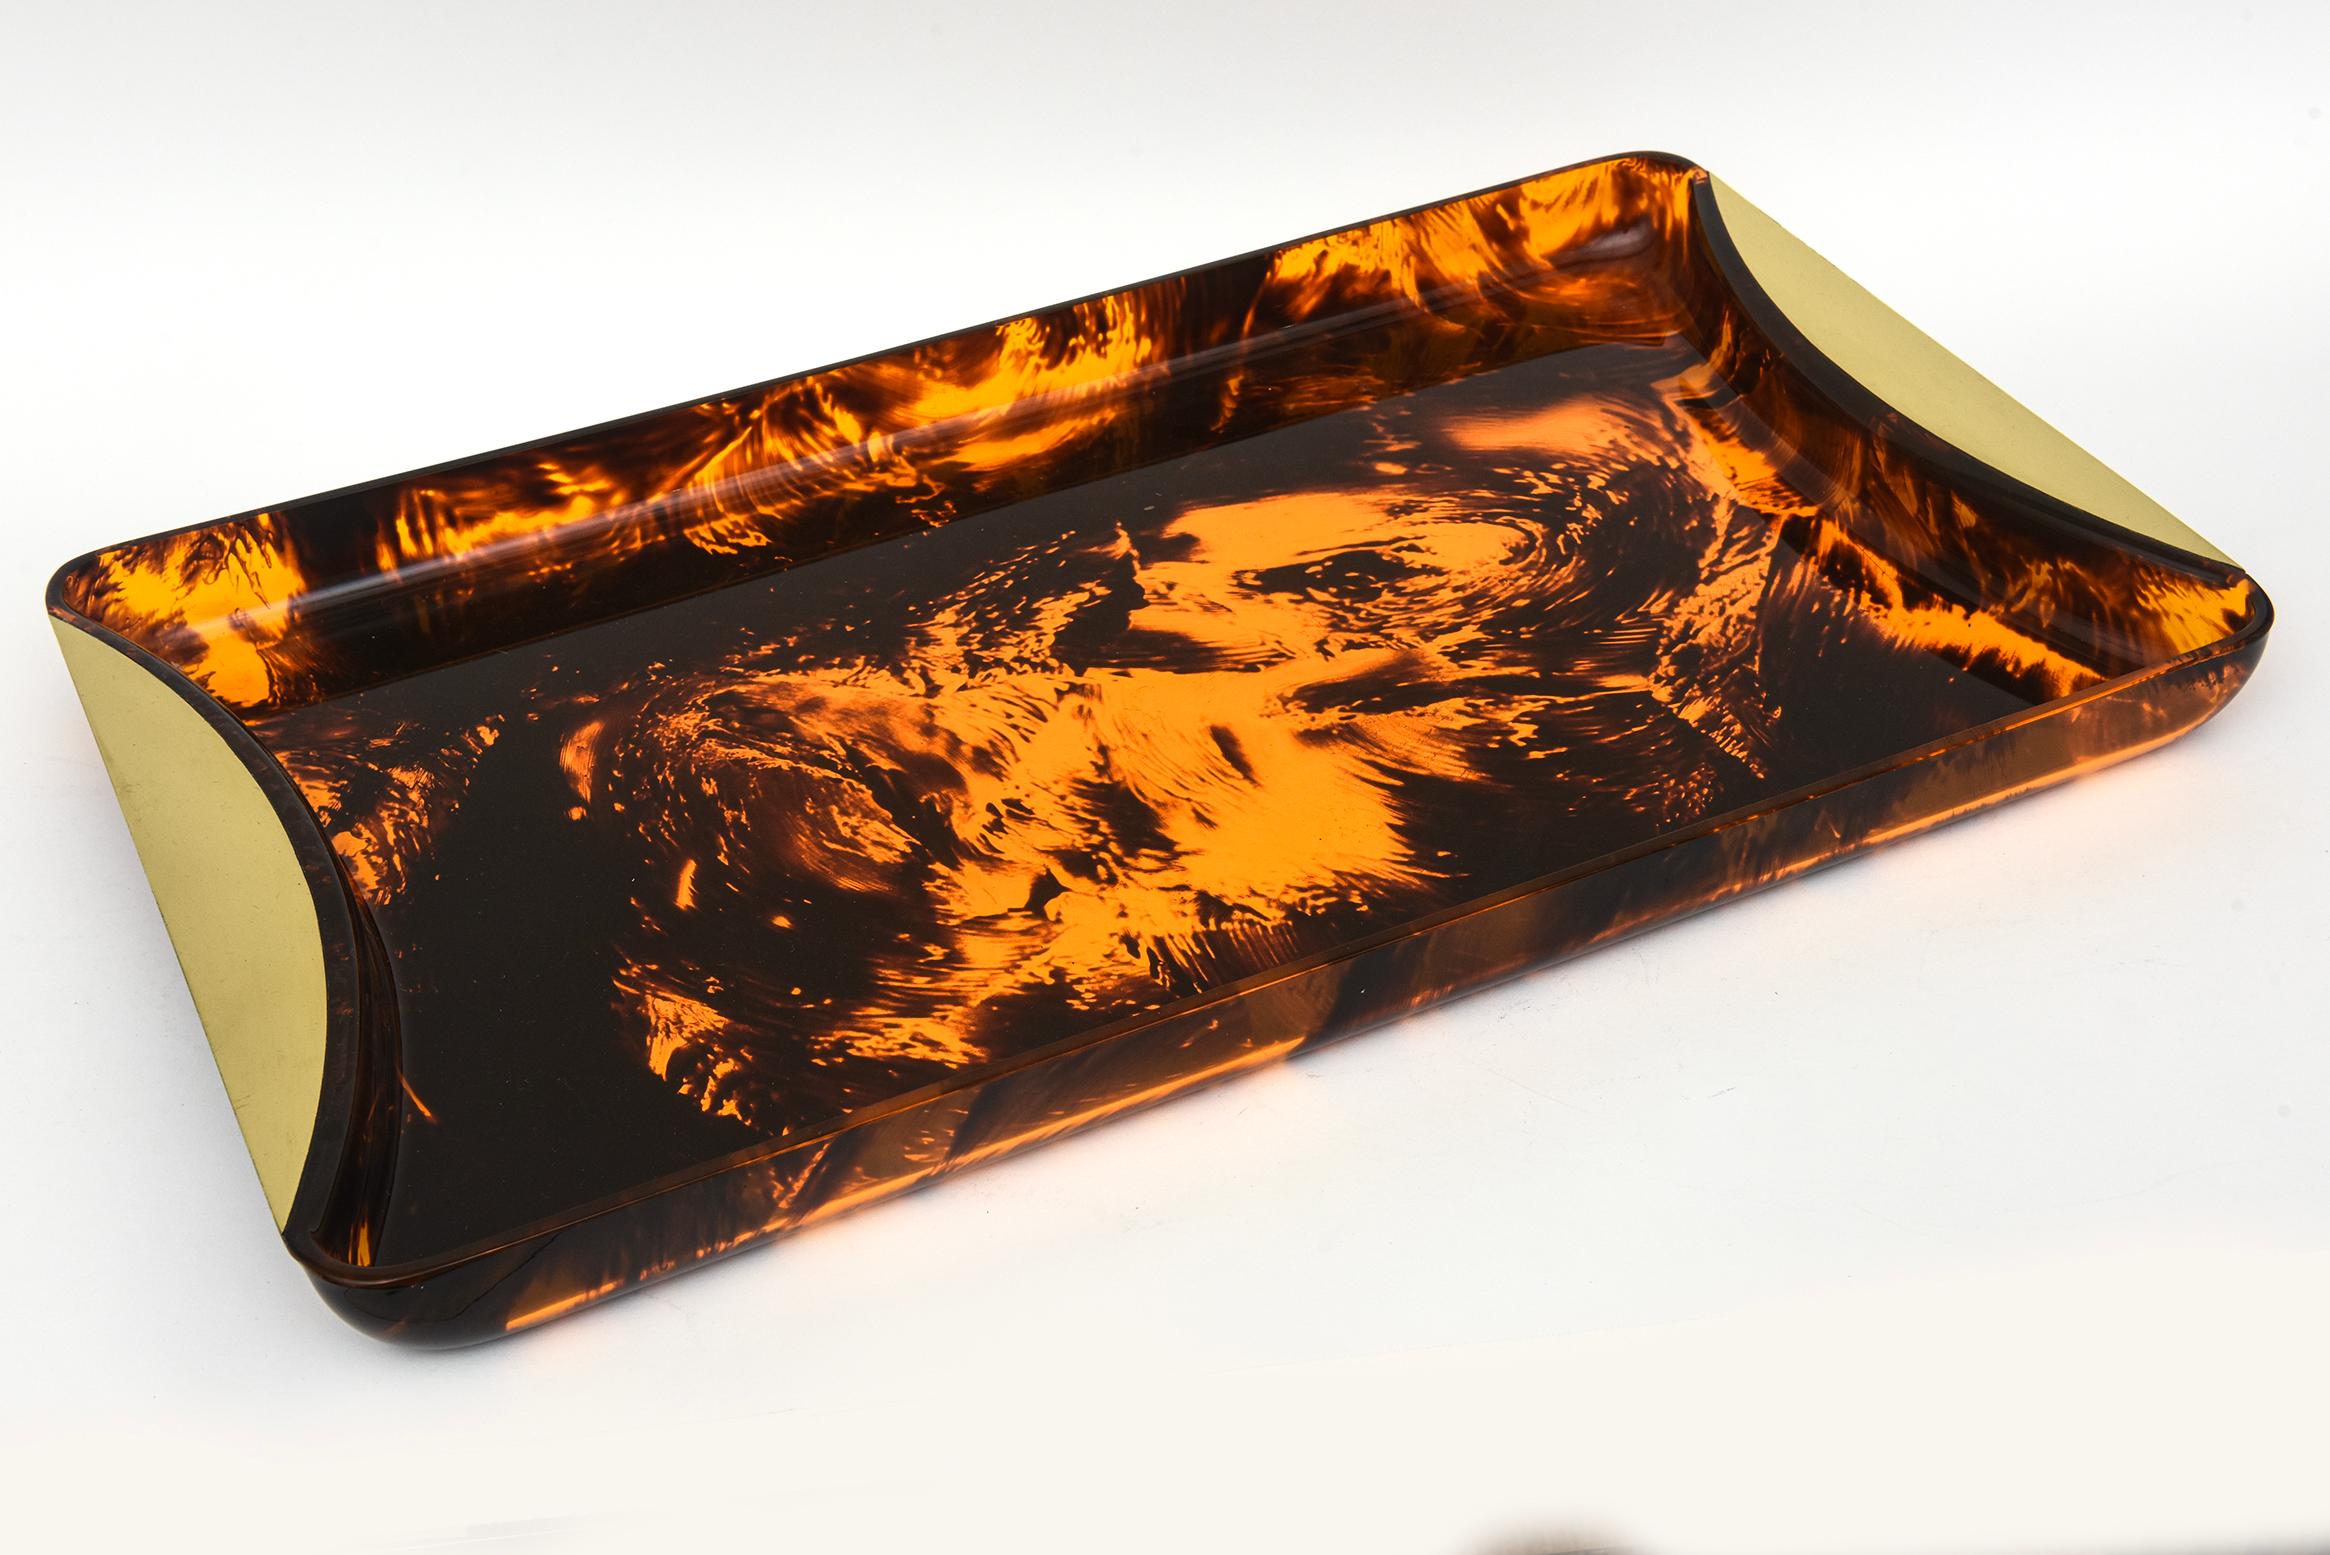 This vintage Rede Guzzini Italian faux tortoise lucite tray with brass handles has been professionally polished and makes great barware and serving needs. The tortoise swirled affect of the lucite gives dimension. It is a long rectangular tray for